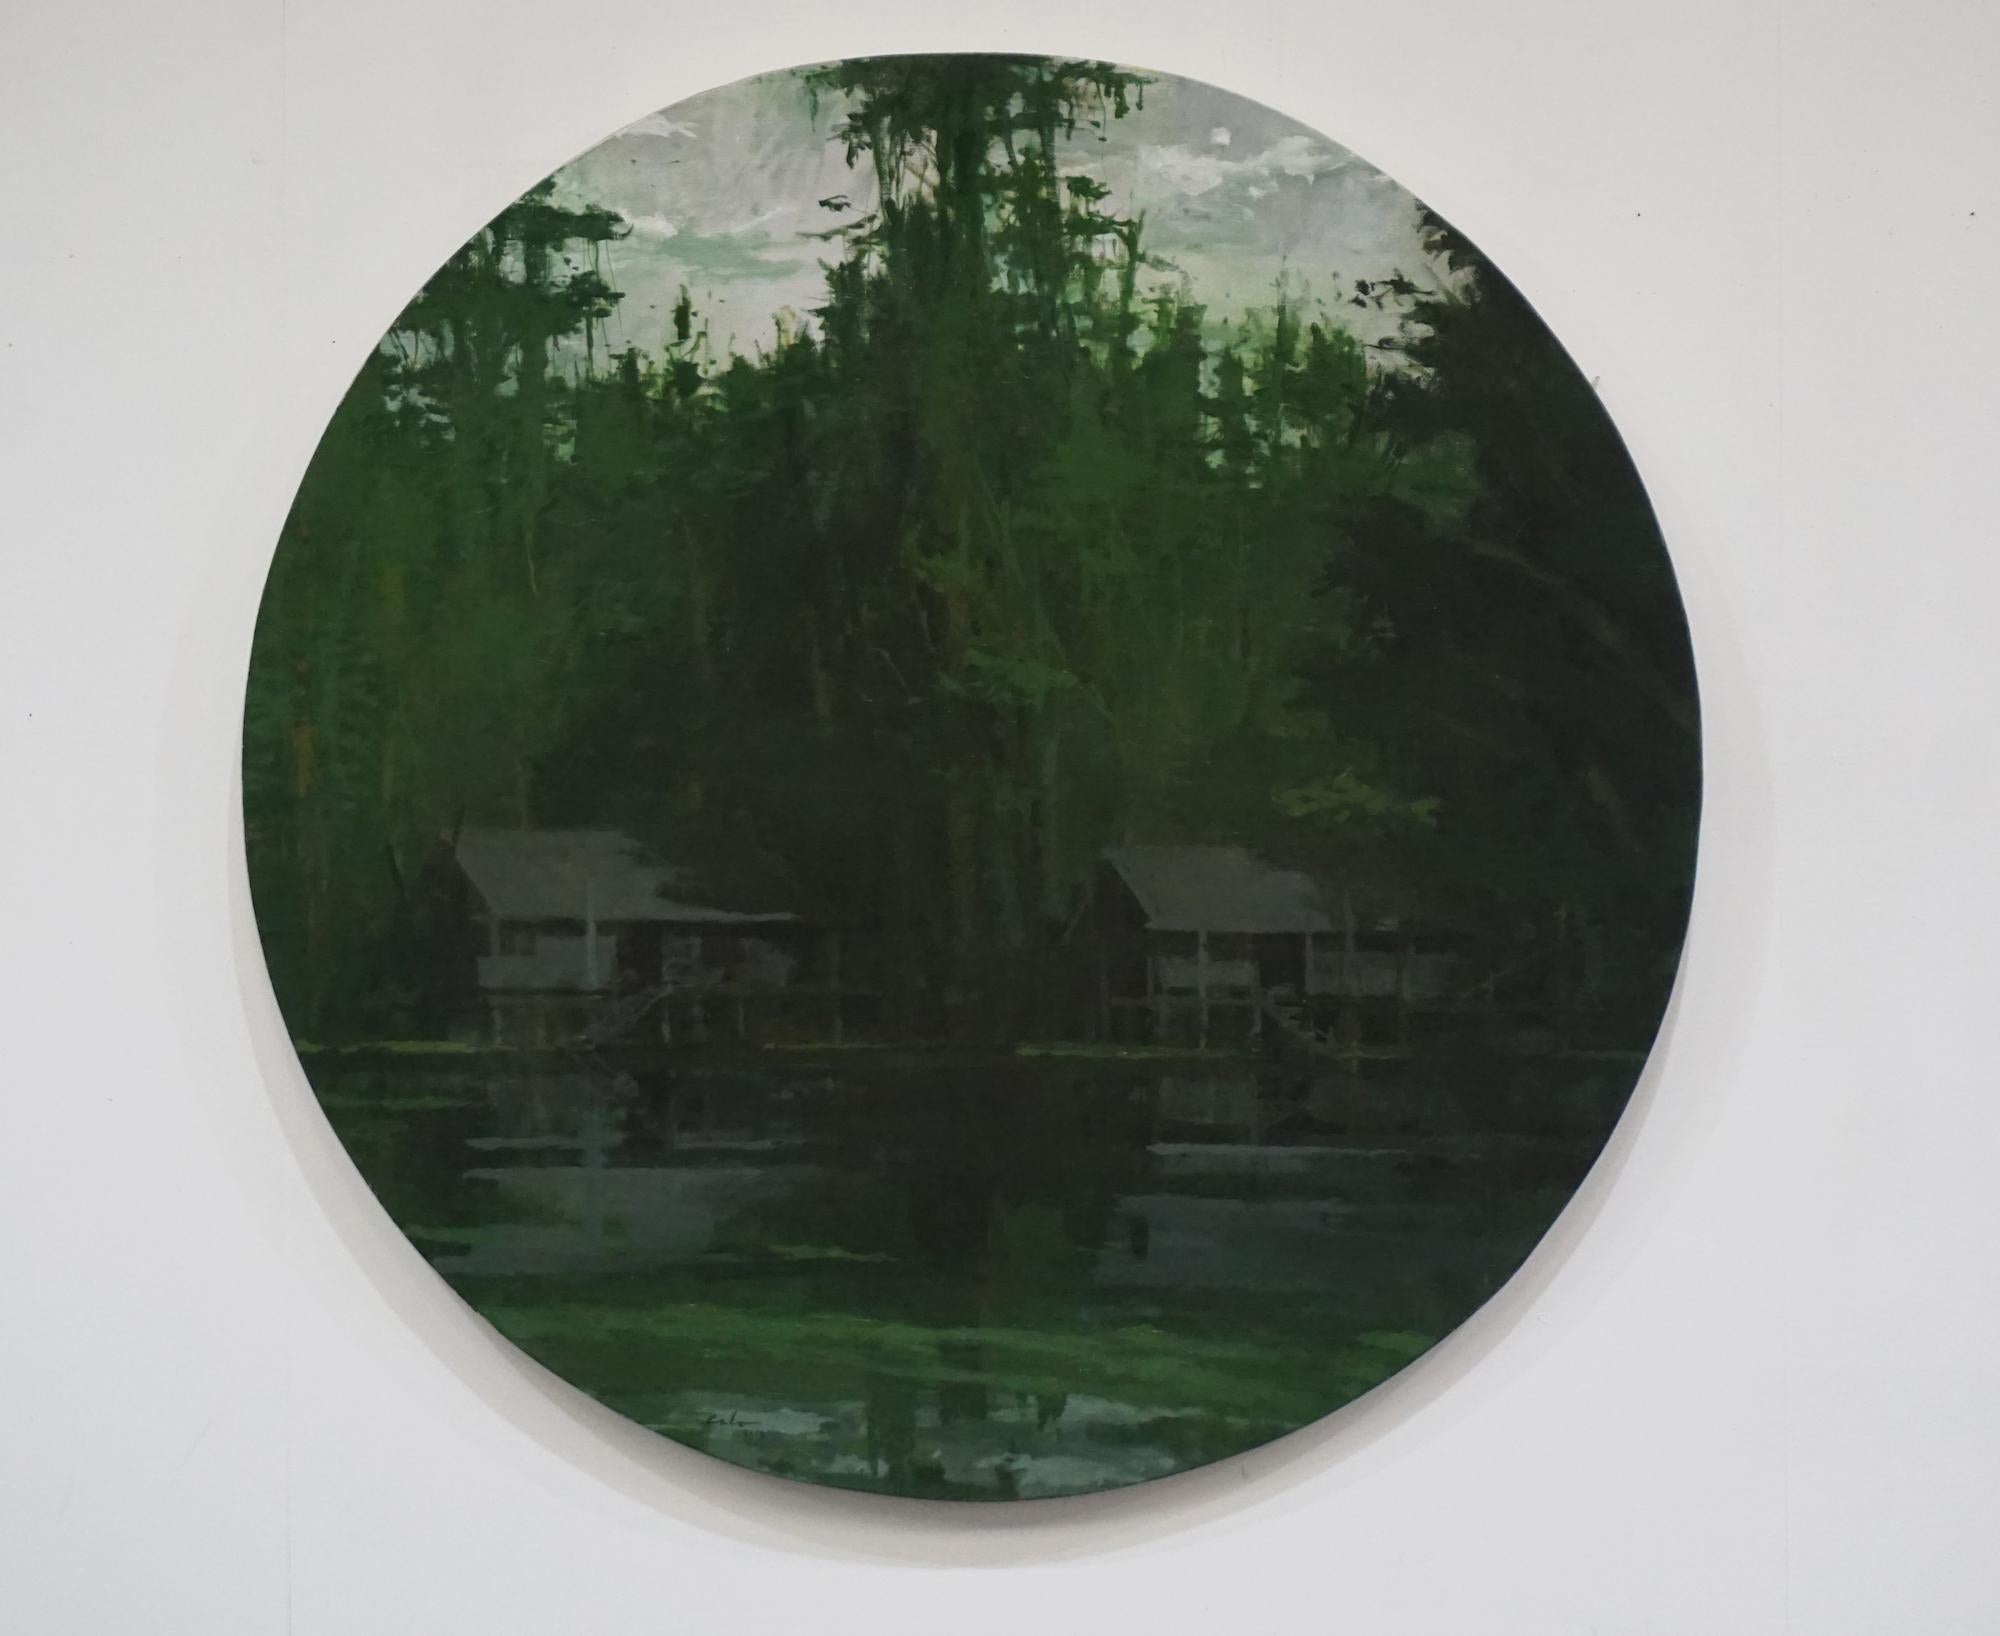 Houses on stilts on the Amazon, Jungle series - round painting, landscape, green